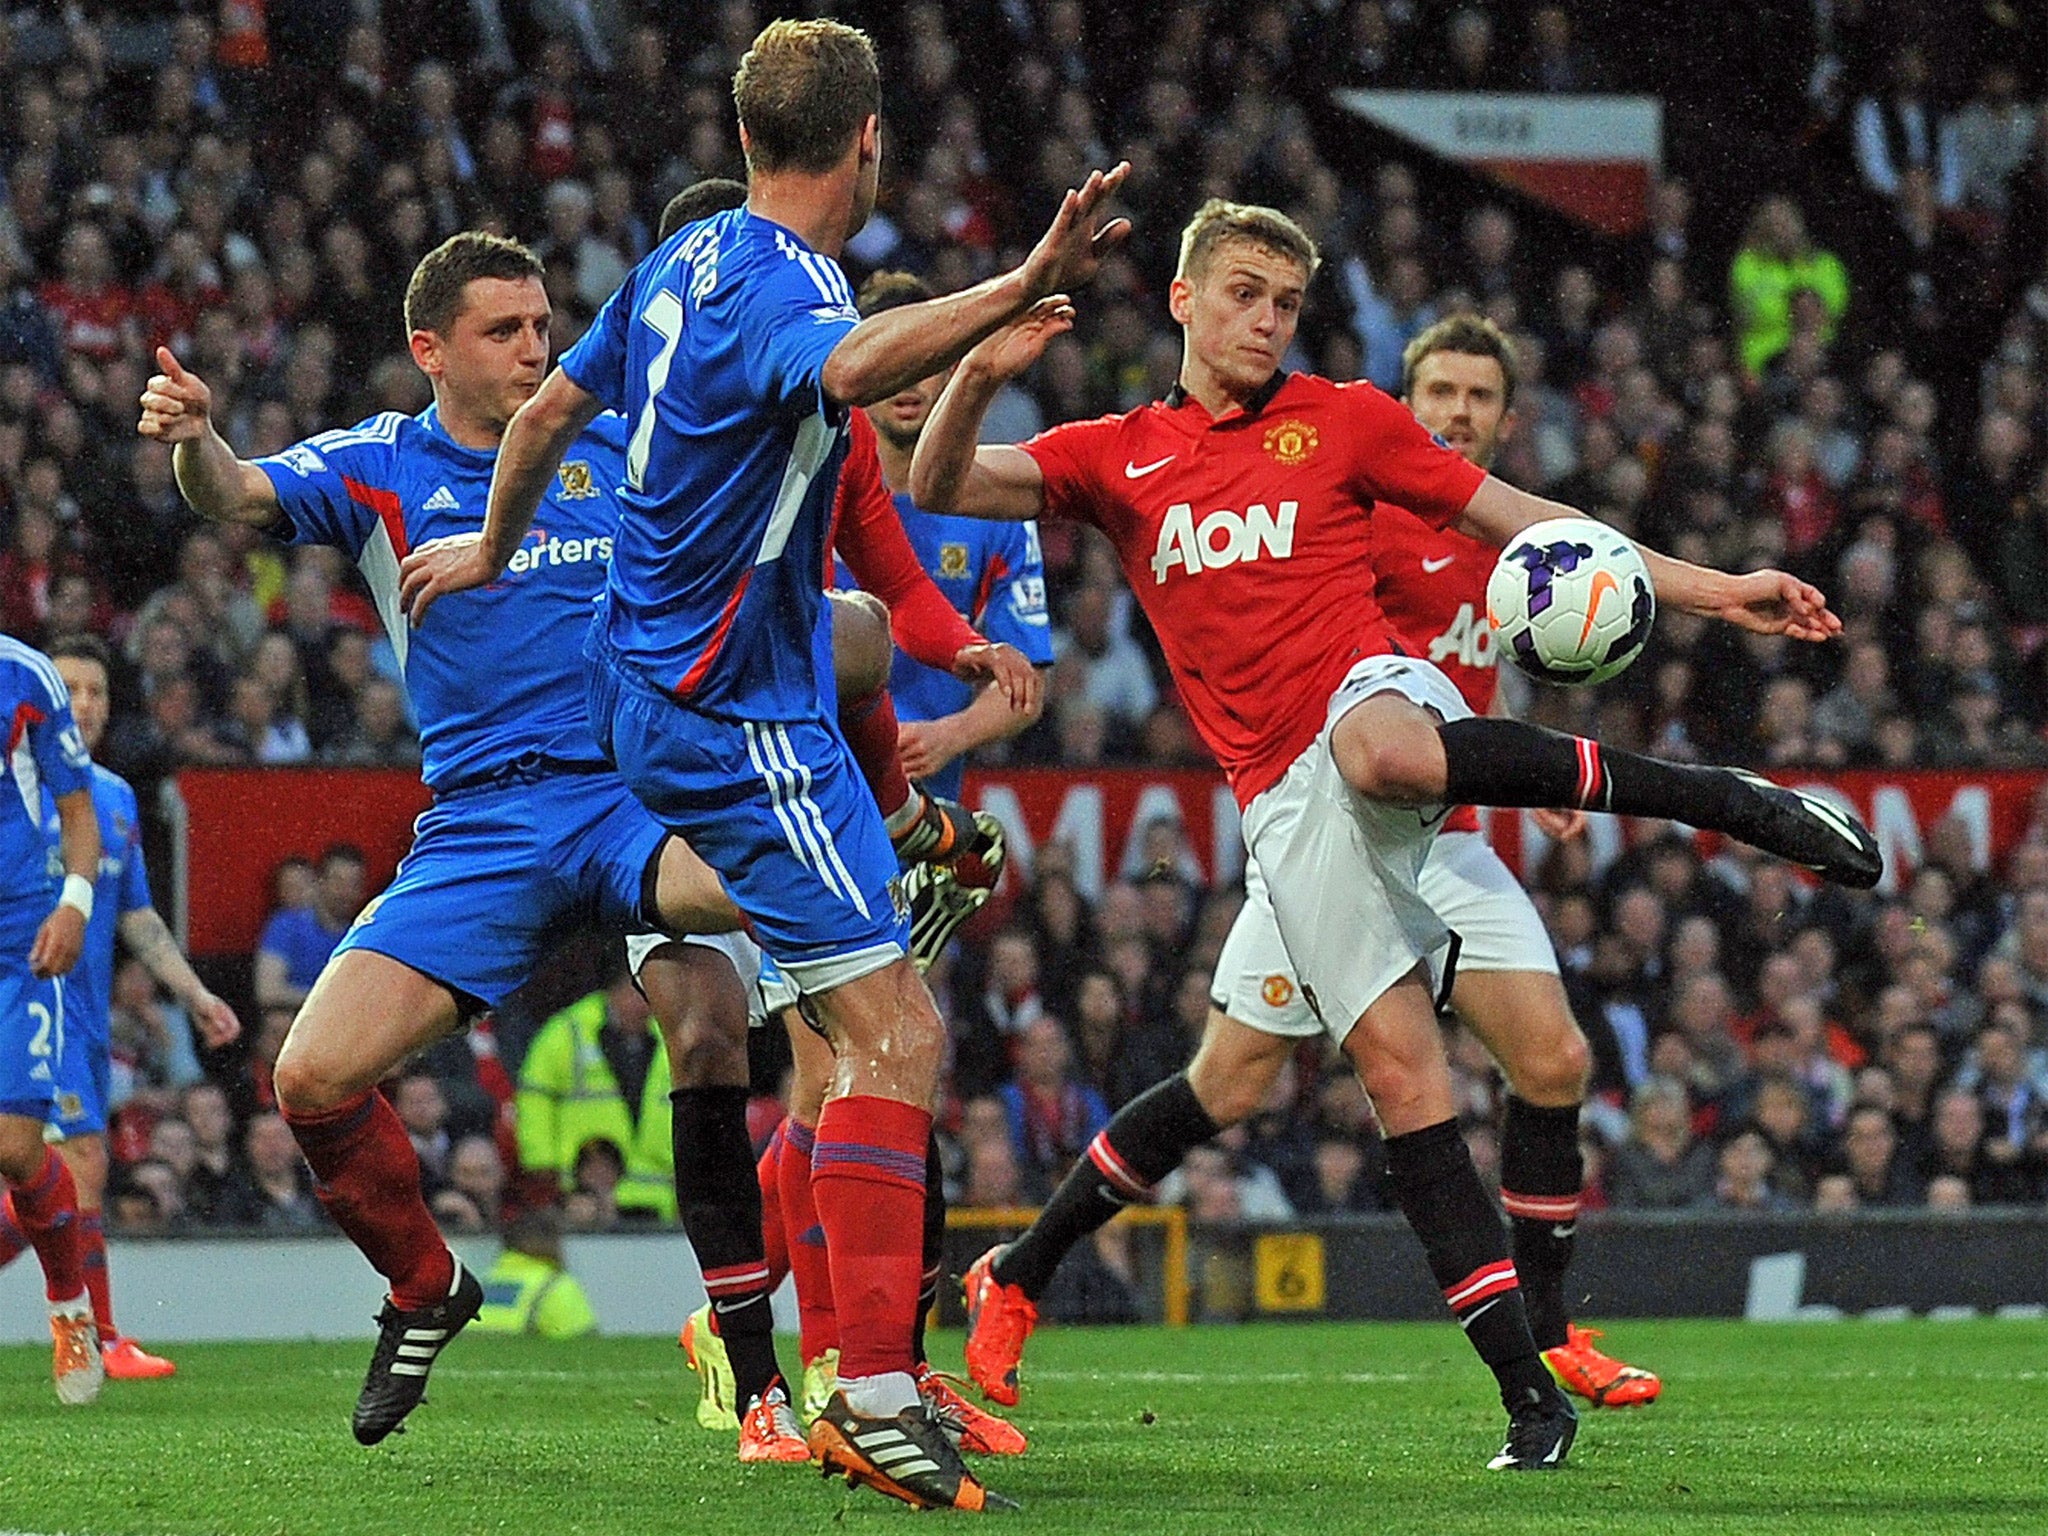 James Wilson scores his first goal of the night against Hull